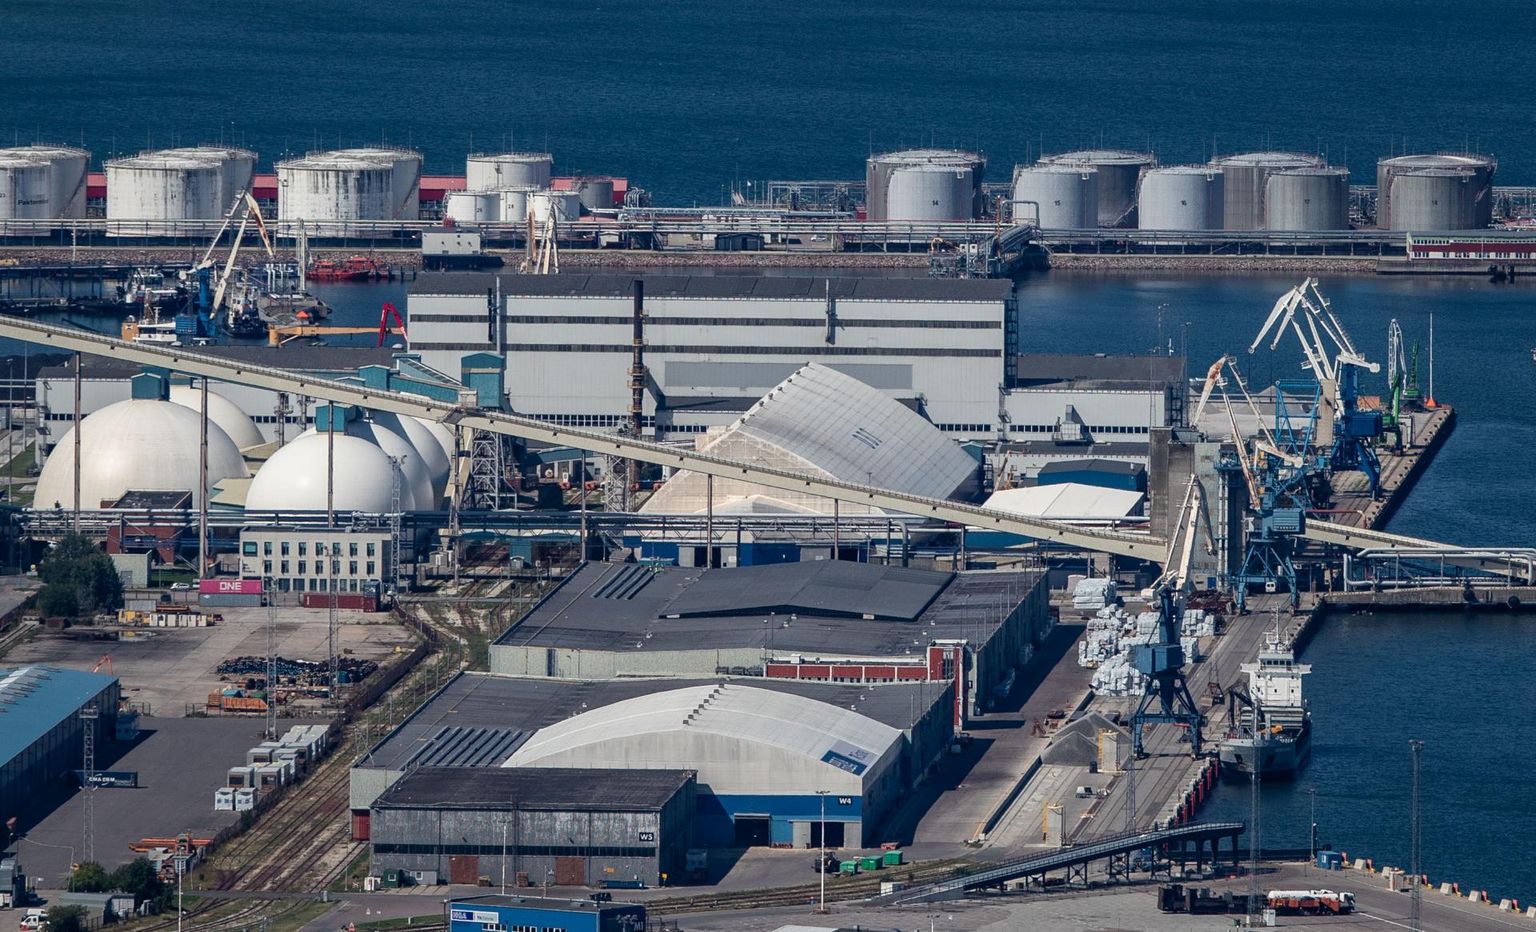 The DBT fertilizer terminal in Muuga harbor (domes on the left).